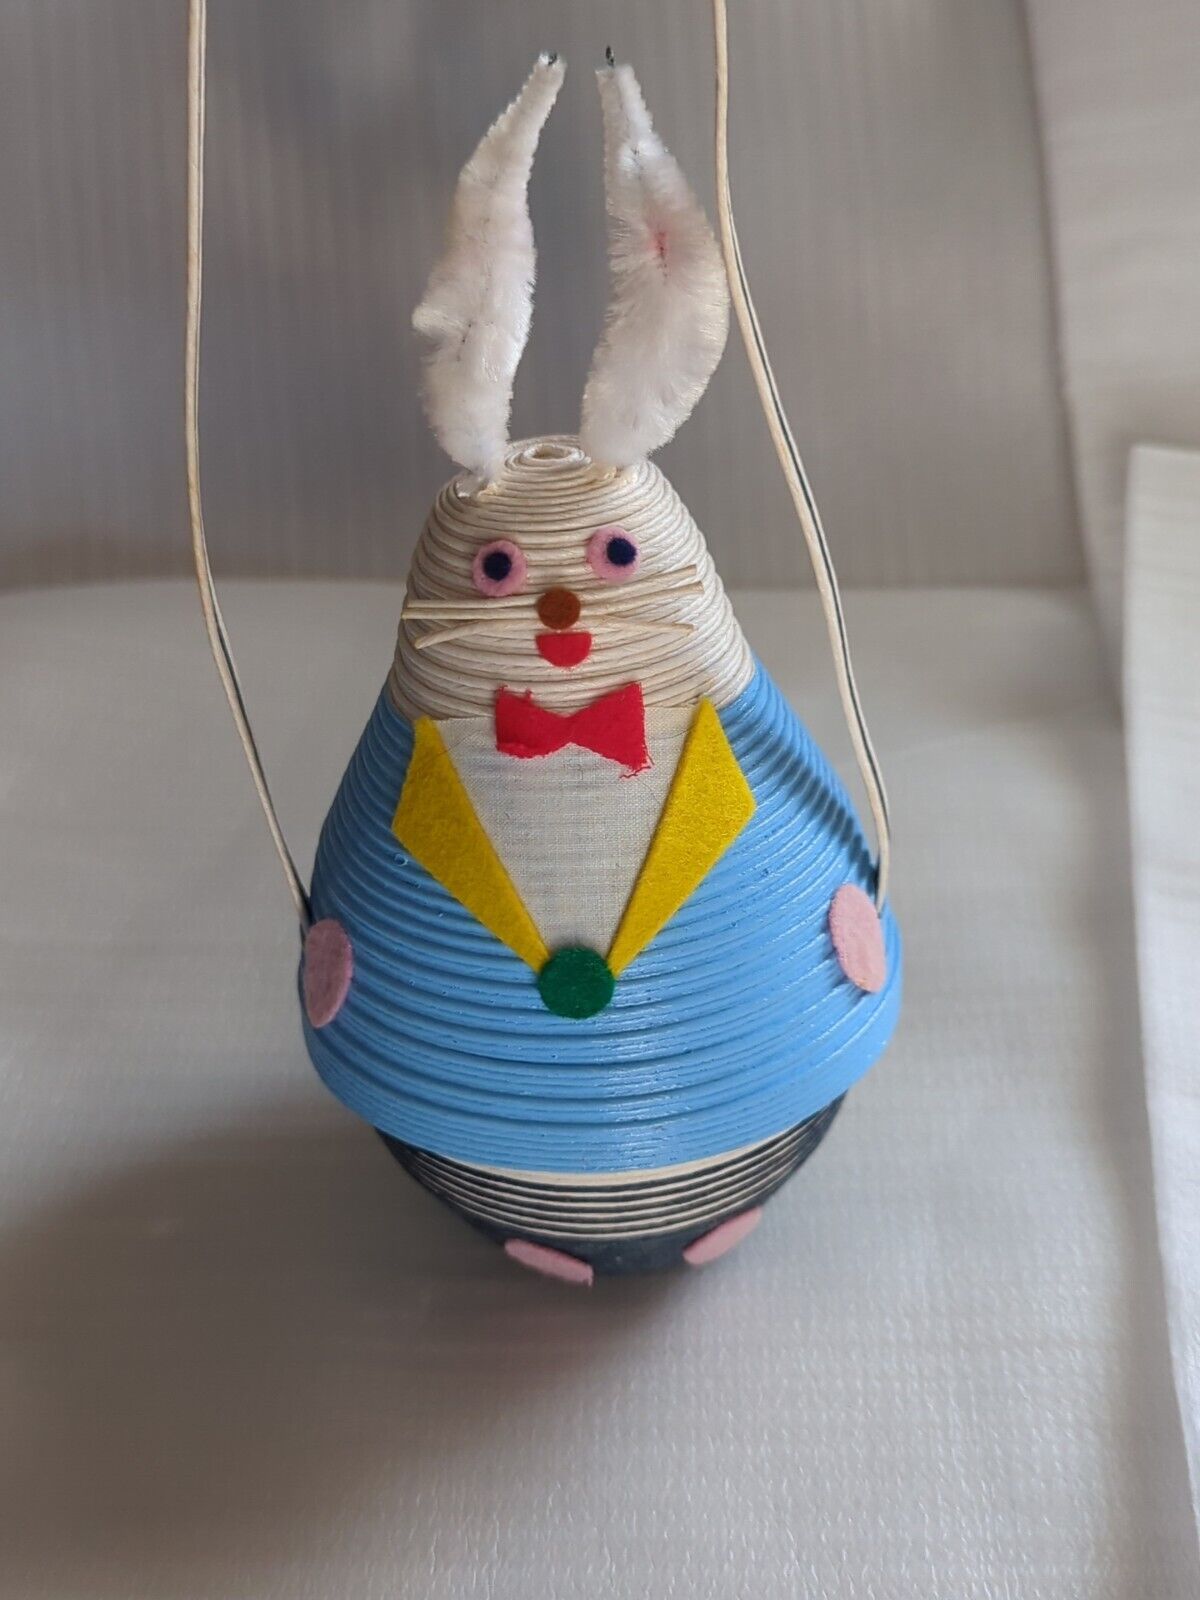 Vintage Easter Bunny Basket,  6” Tall Without Counting Handle - Hand Made